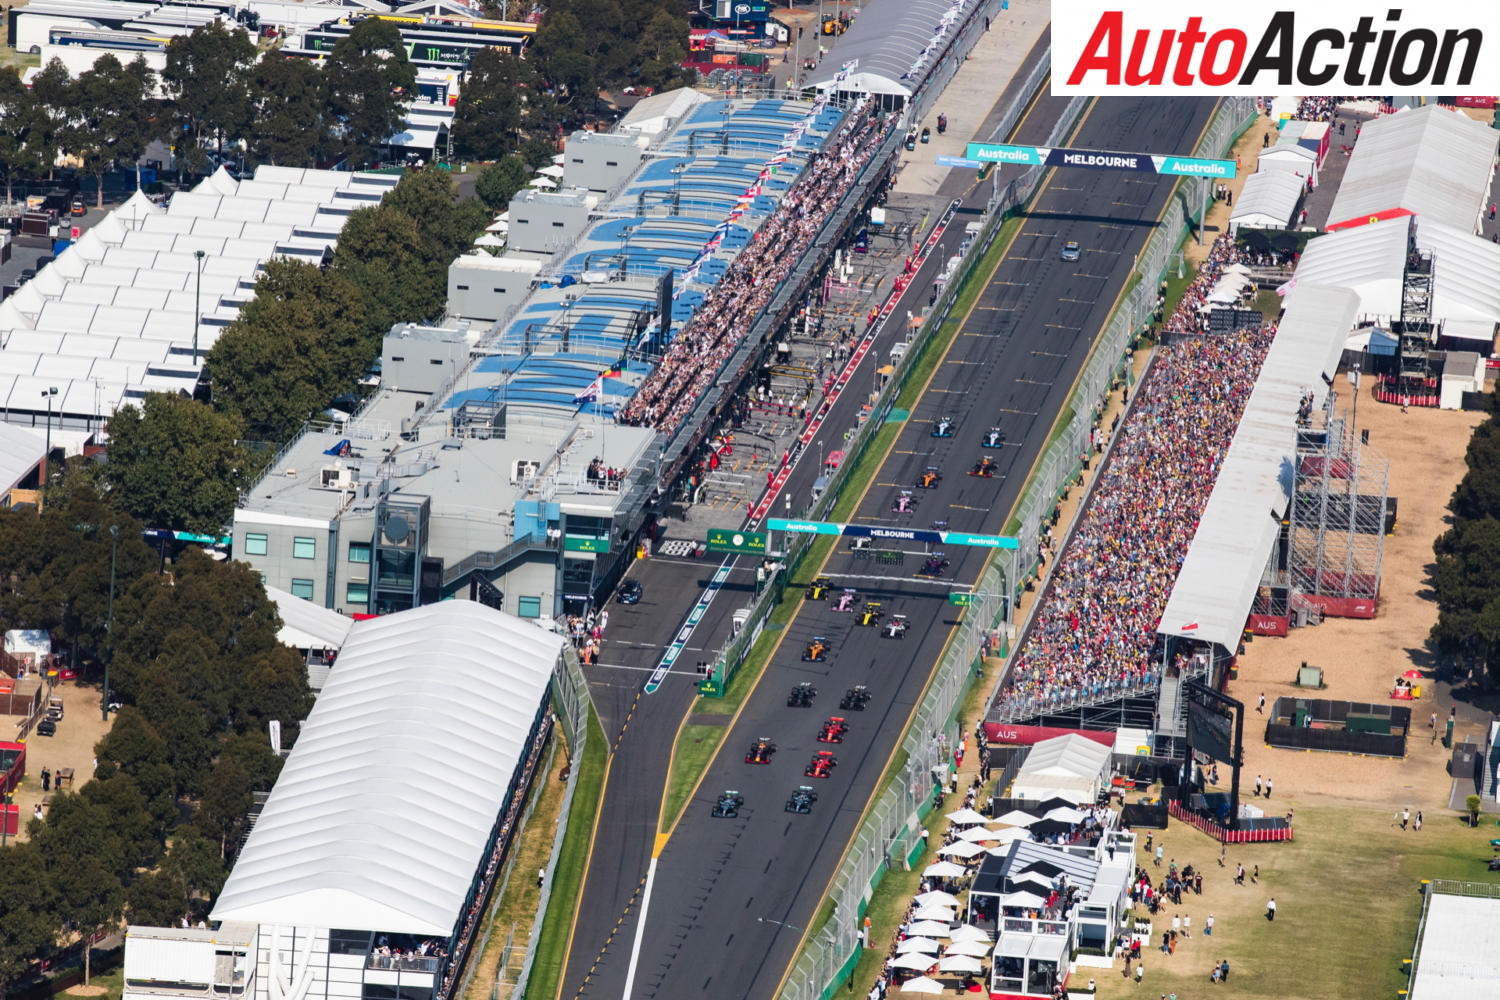 Australian to host third F1 race in 2022 - Image: Motorsport Images